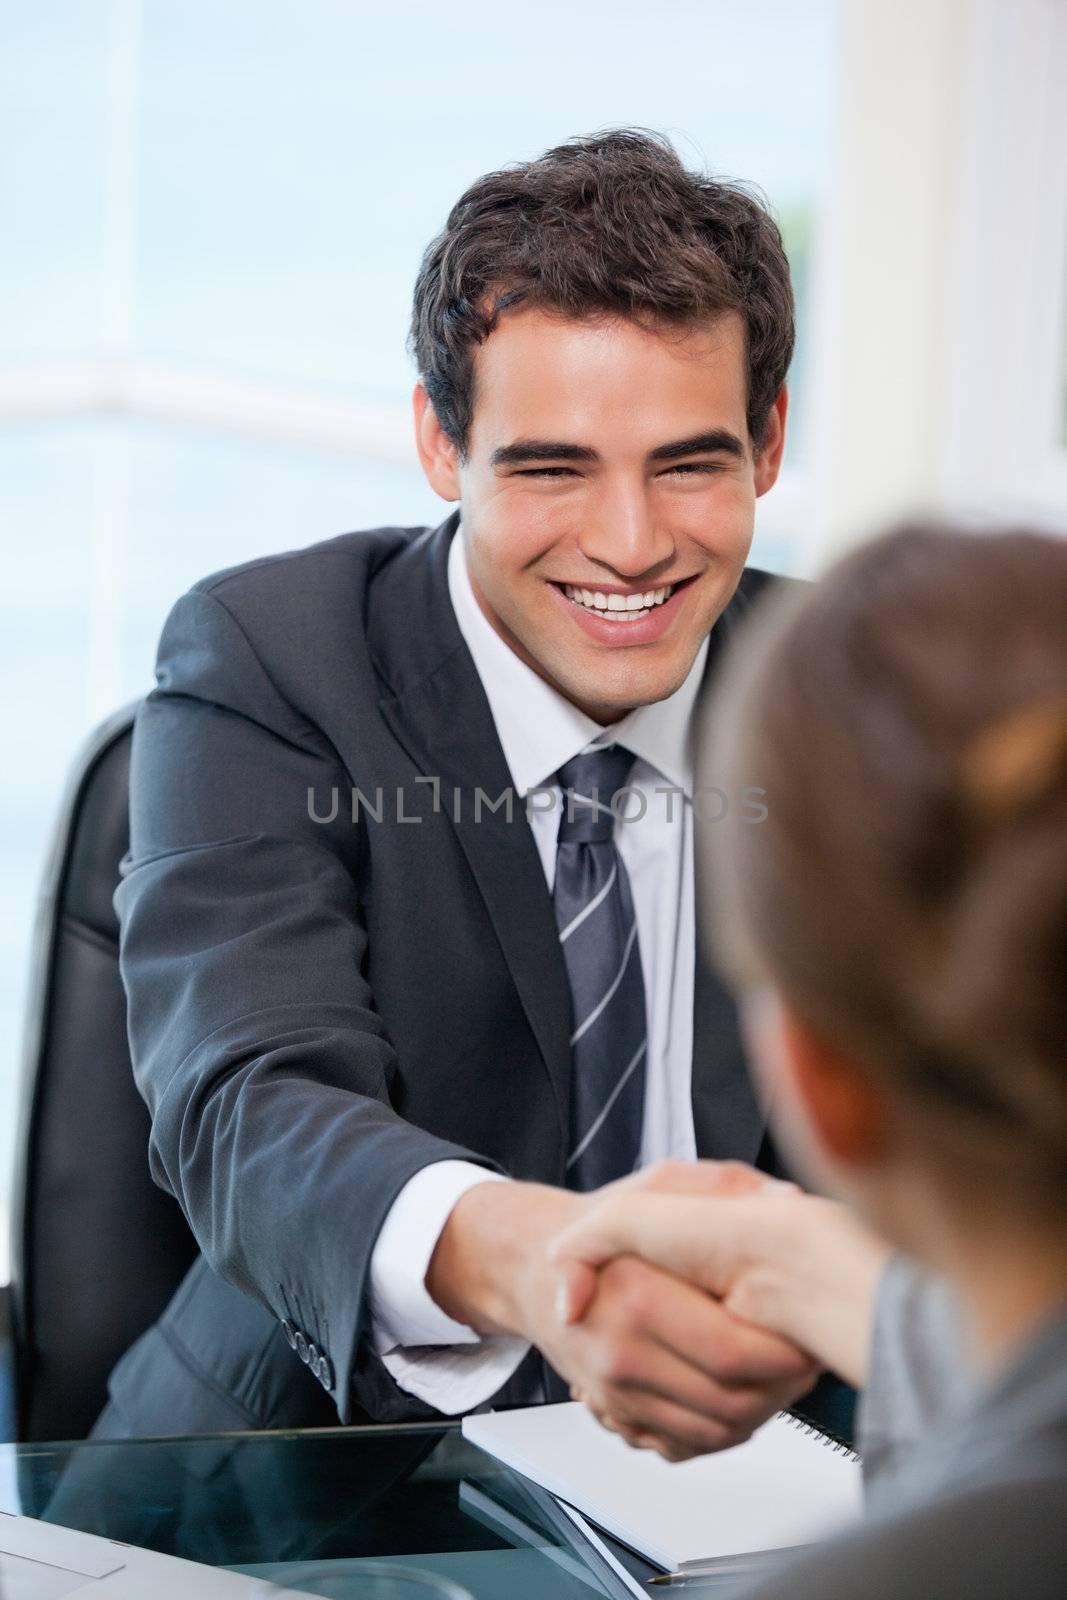 Businessman shaking hands with a client while smiling in an office